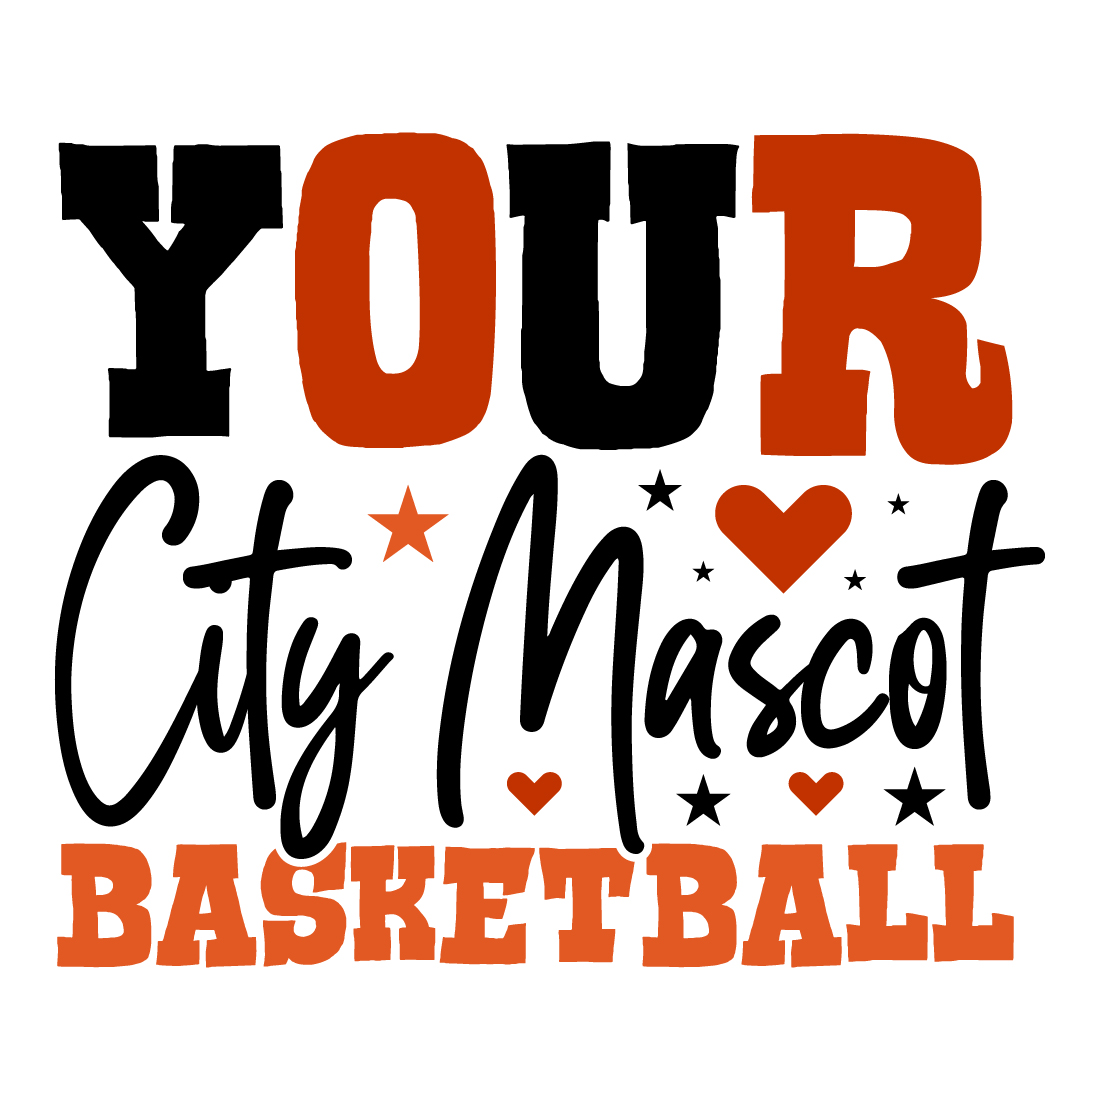 Your City Mascot Basketball preview image.